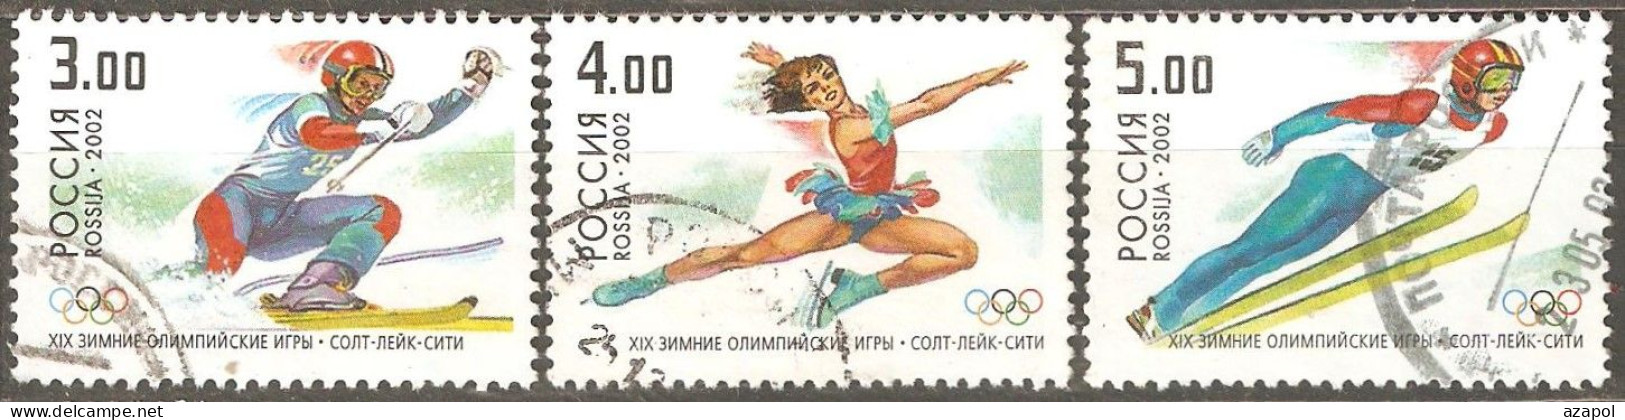 Russia: Full Set Of 3 Used Stamps, Winter Olympic Games - Salt Lake City, USA, 2002, Mi#956-8 - Usados